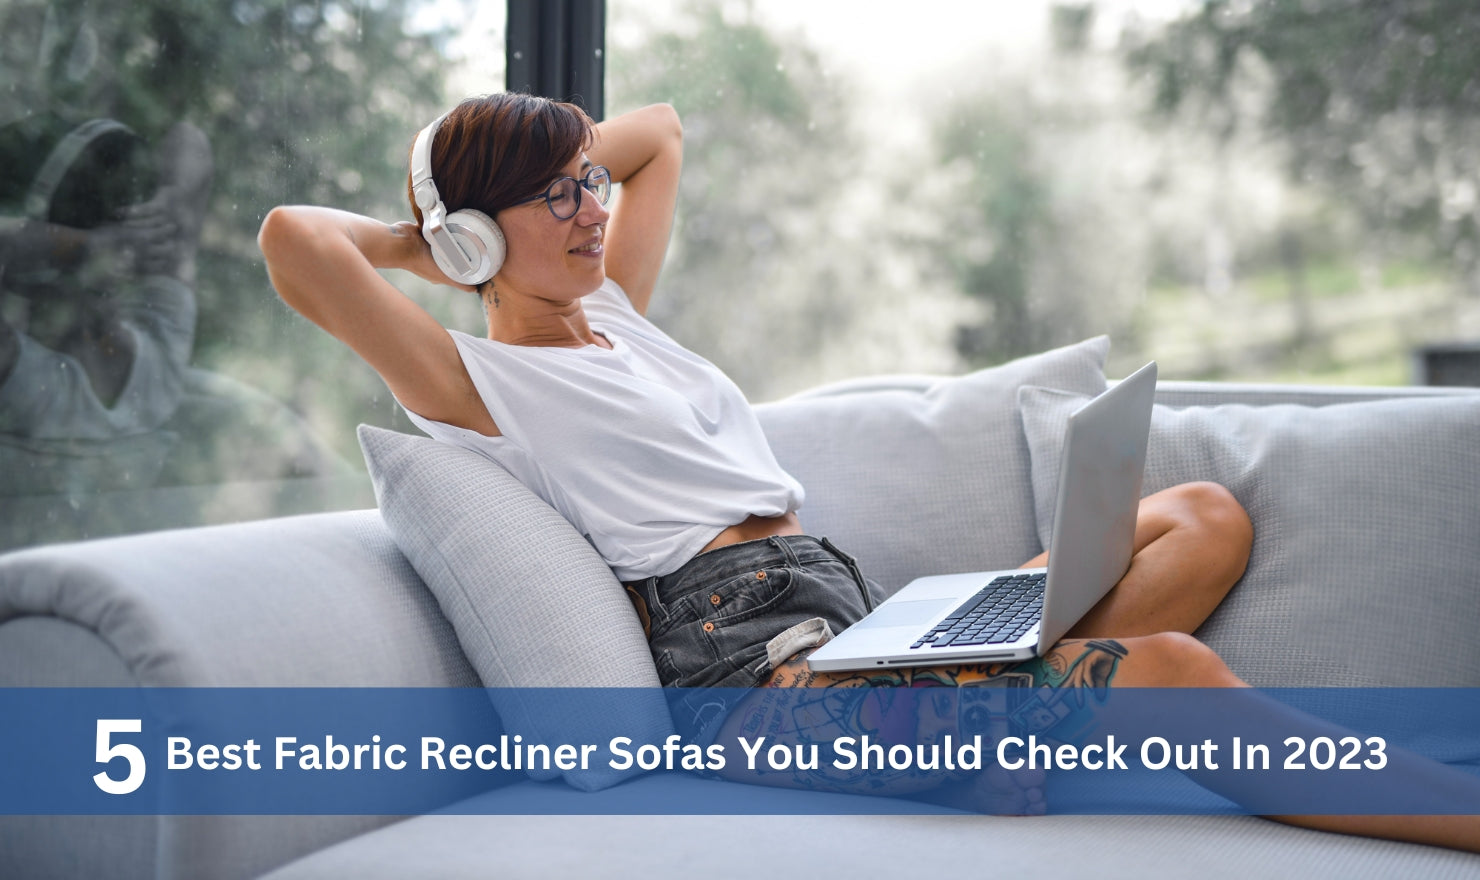 5 Best Fabric Recliner Sofas You Should Check Out